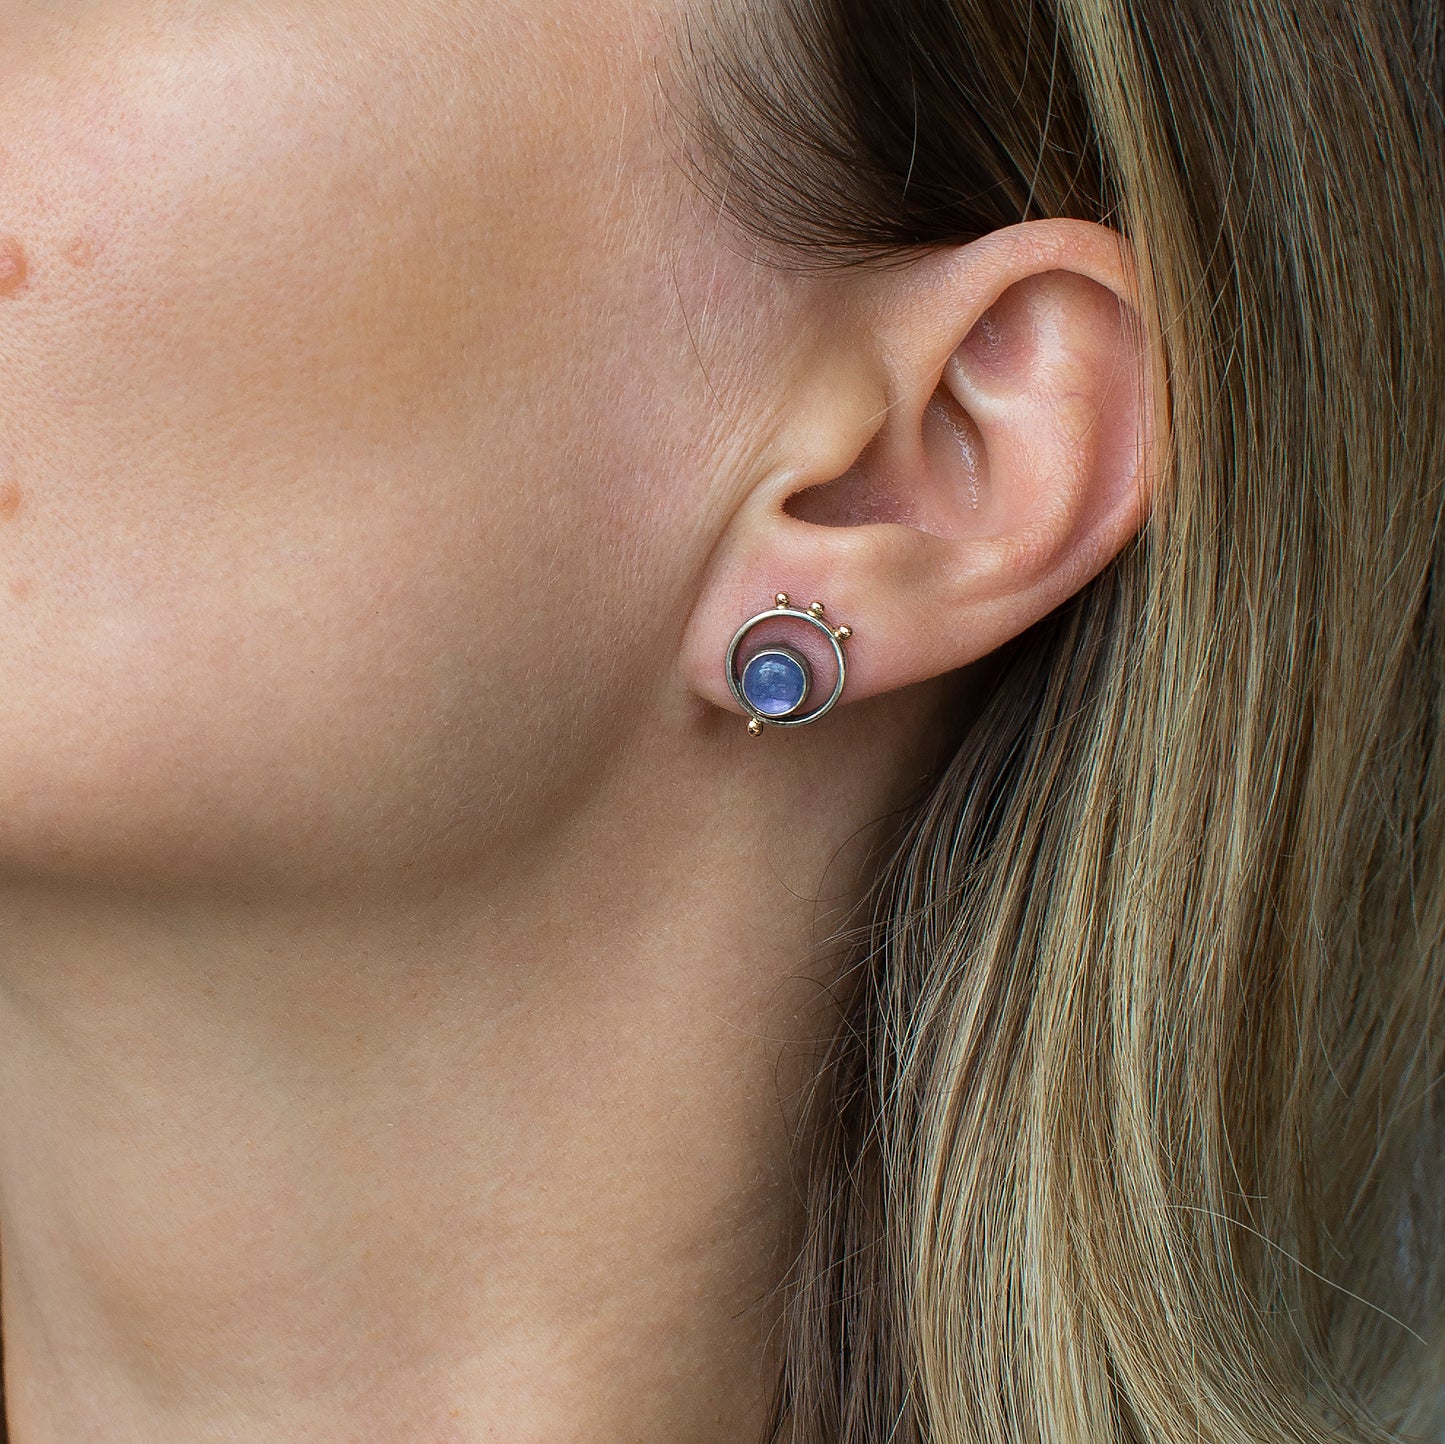 Tanzanite Minimalistic Earrings With 14K Gold Beads